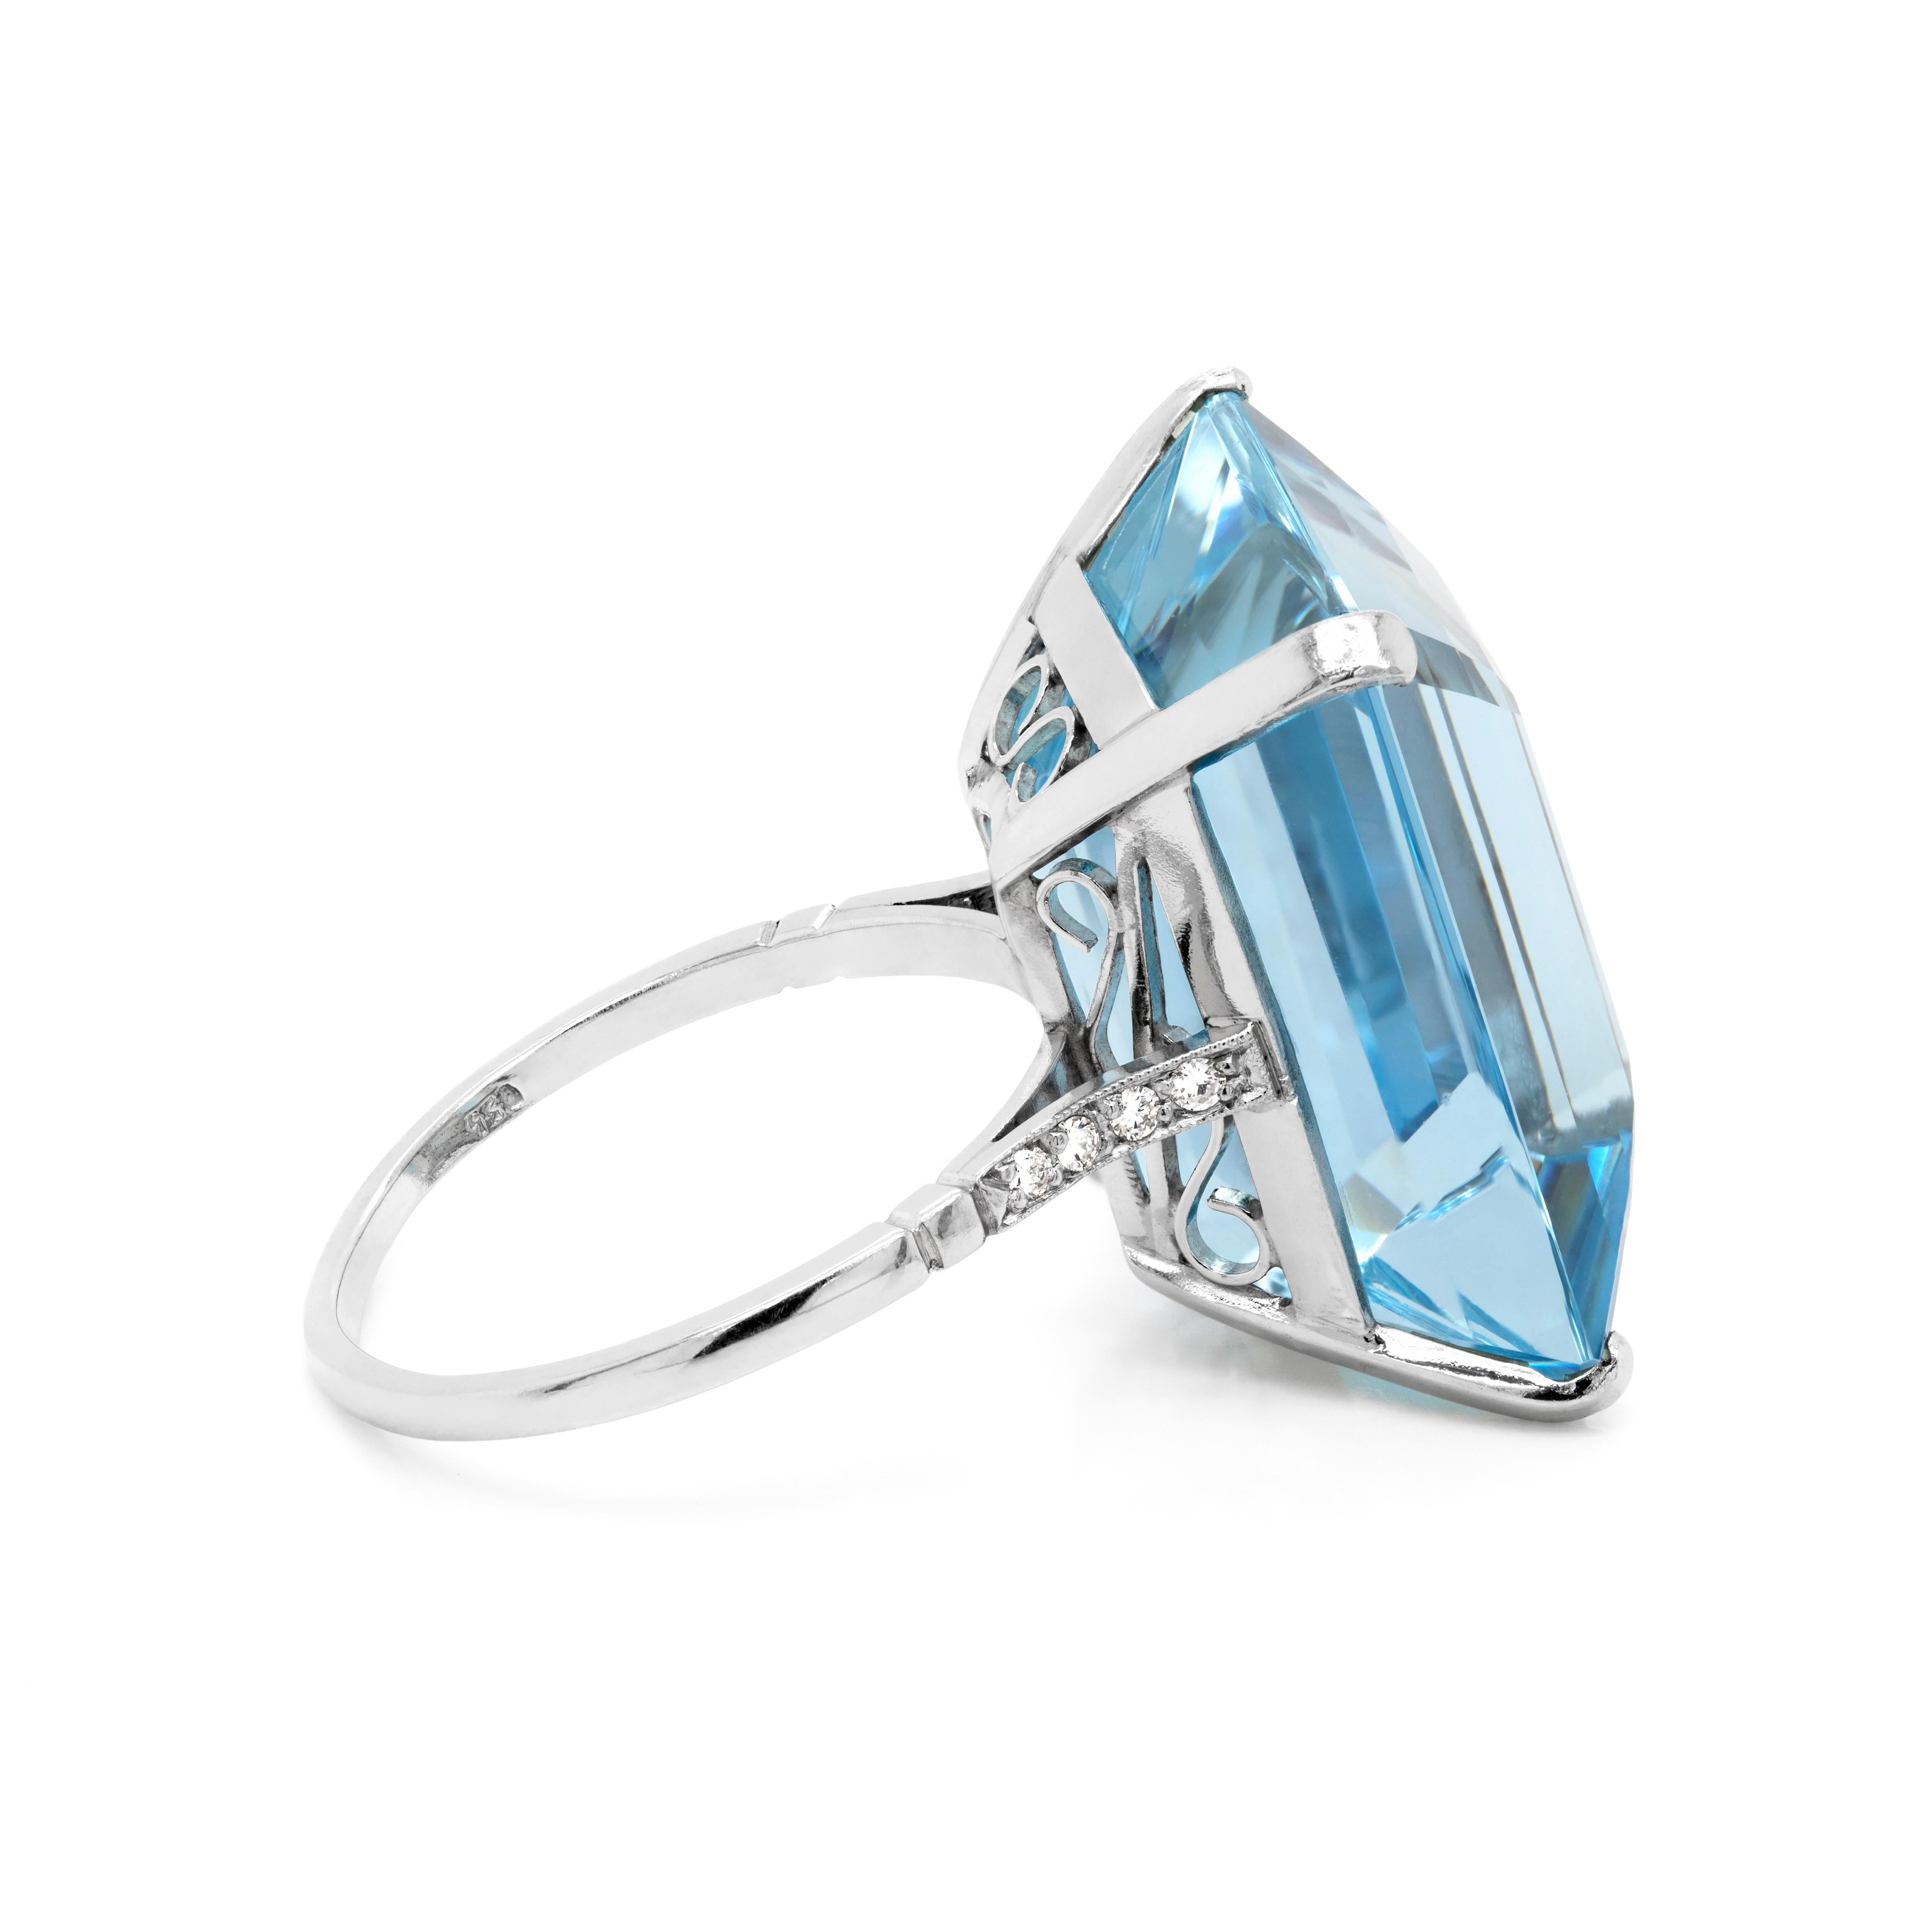 This remarkable Art Deco ring beautifully features an emerald cut aquamarine weighing an impressive 28.50 carats mounted in a four claw, open back setting. The gemstone is sat in an openwork gallery with delicate scrolling motifs across the collet.